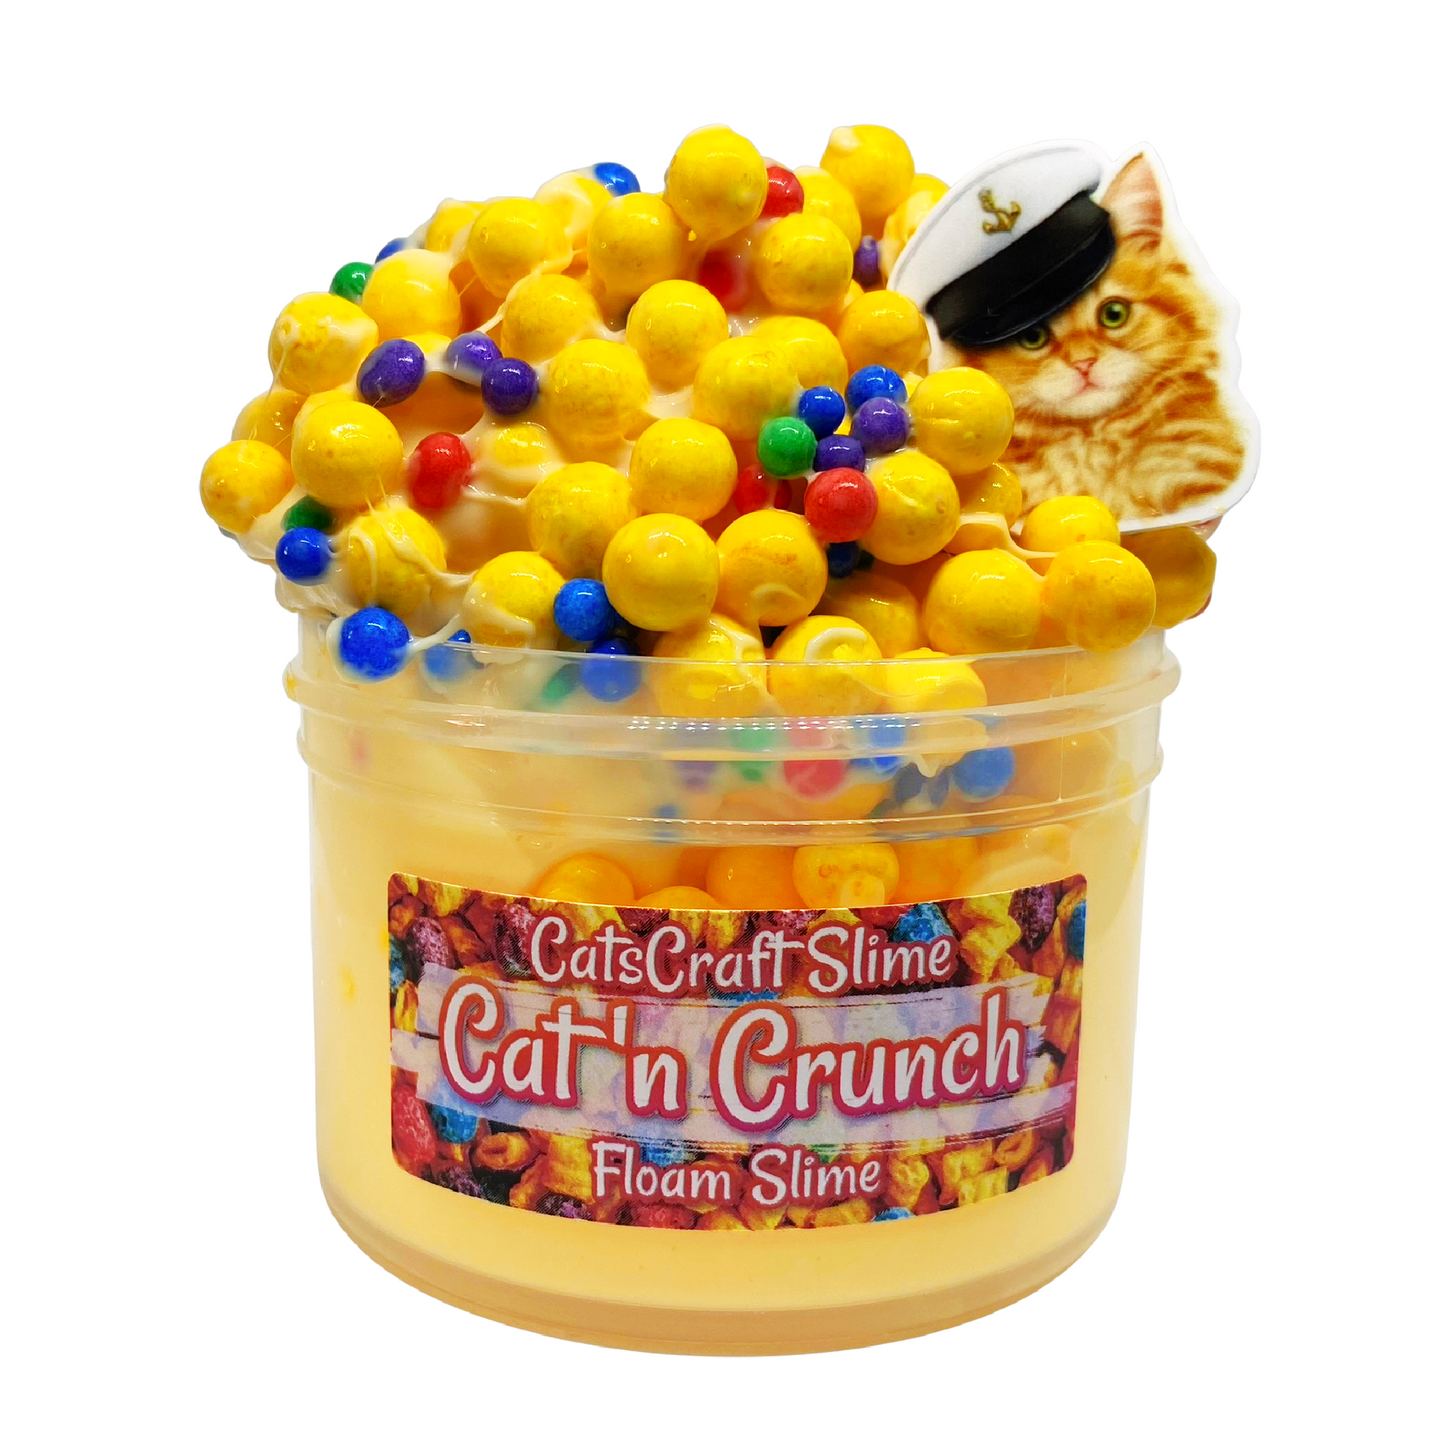 Jumbo Floam Slime "Cat'n Crunch" SCENTED crunchy ASMR foam beads with cat charm